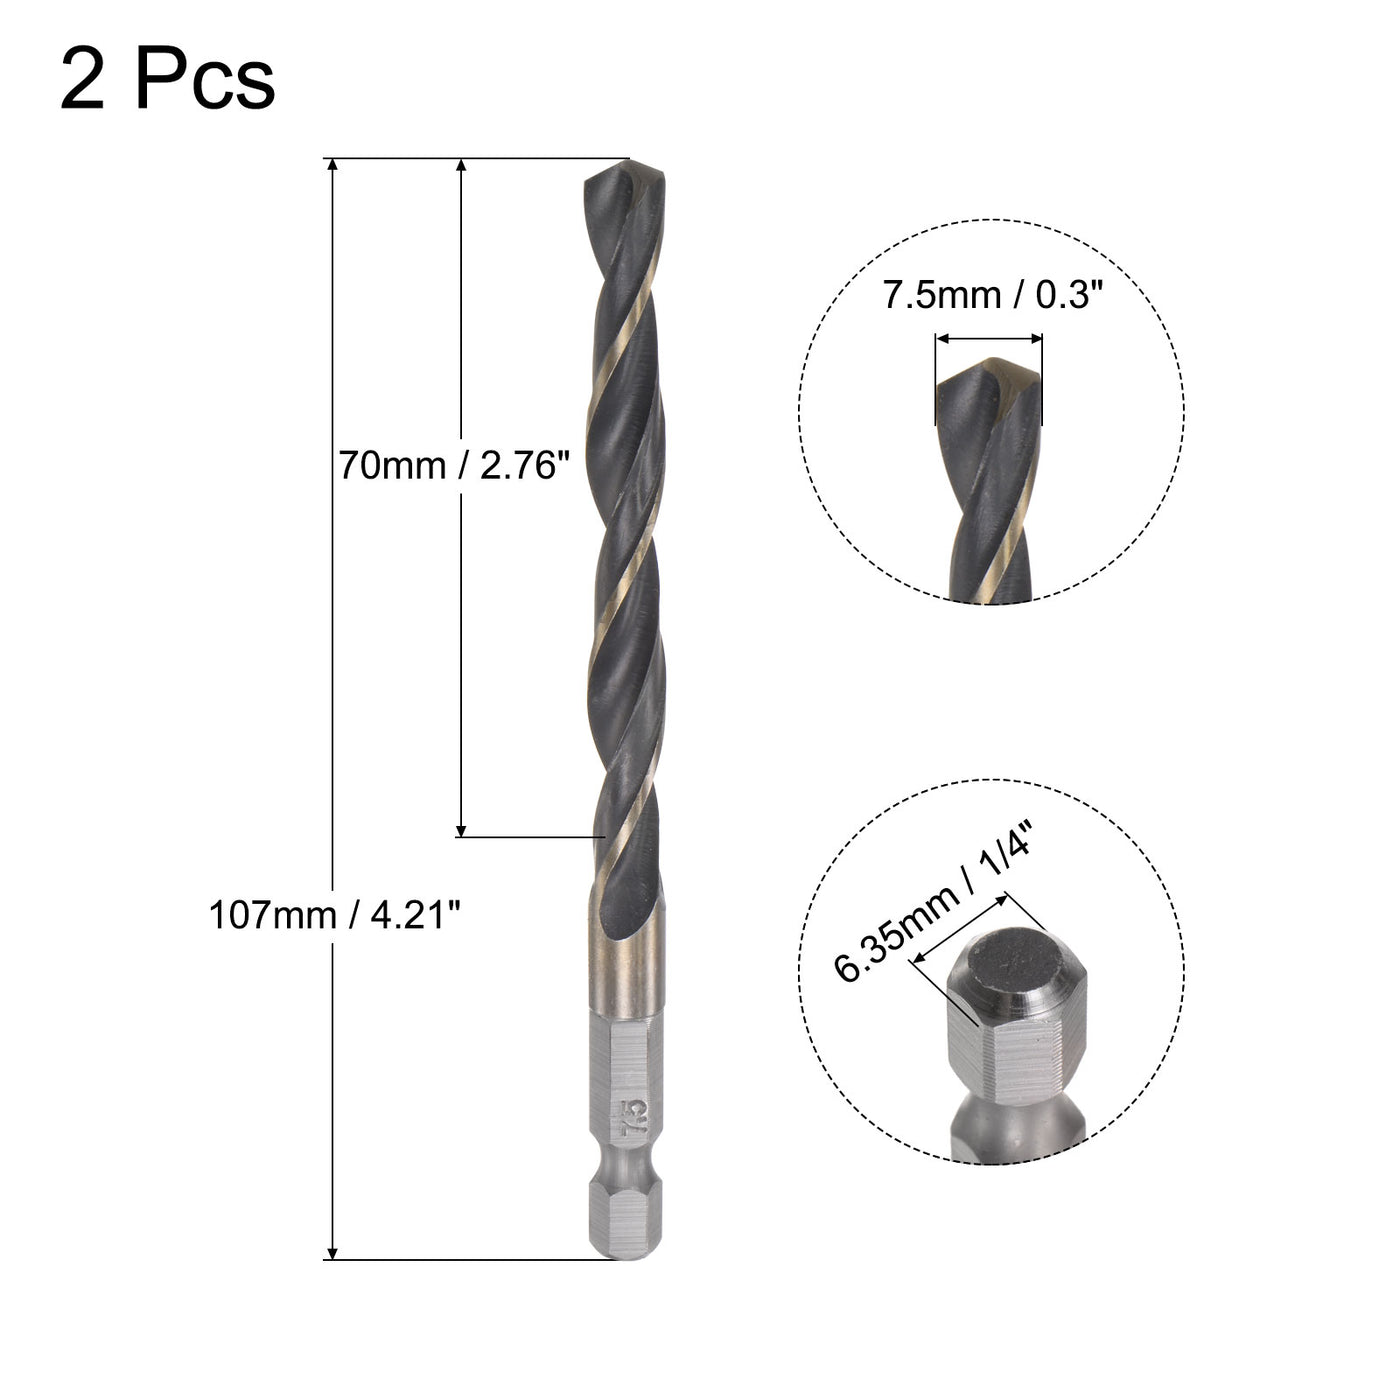 uxcell Uxcell 2Pcs 7.5mm High Speed Steel Twist Drill Bit with Hex Shank 107mm Length